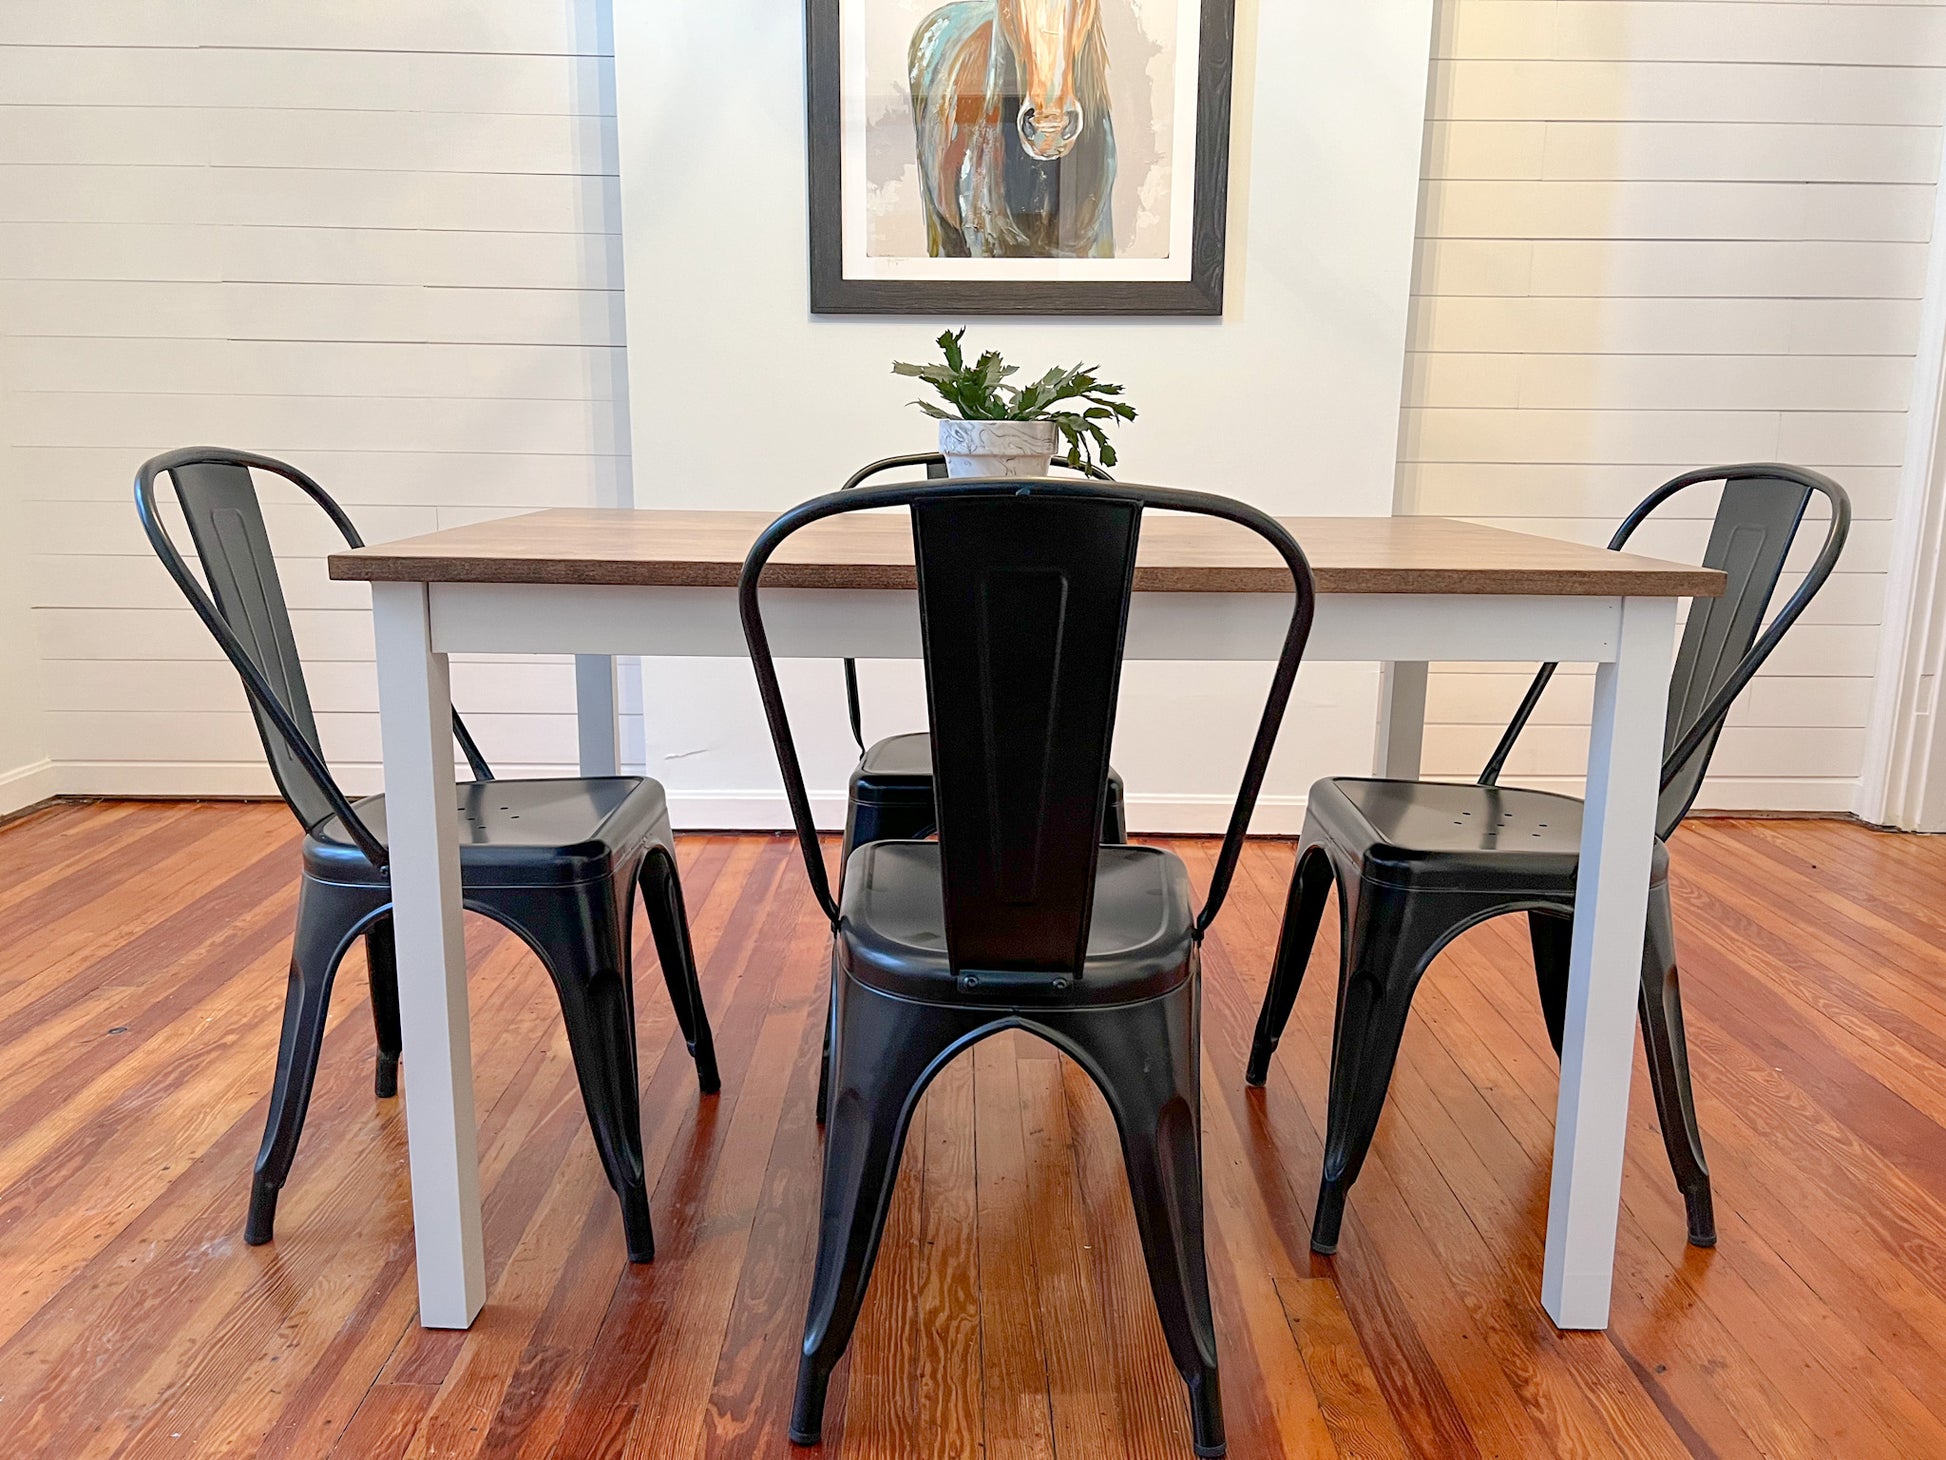 Pictured with a 48" L x 30" W hard maple table with Espresso stain and white painted base. Also pictured with 4 metal dining chairs.